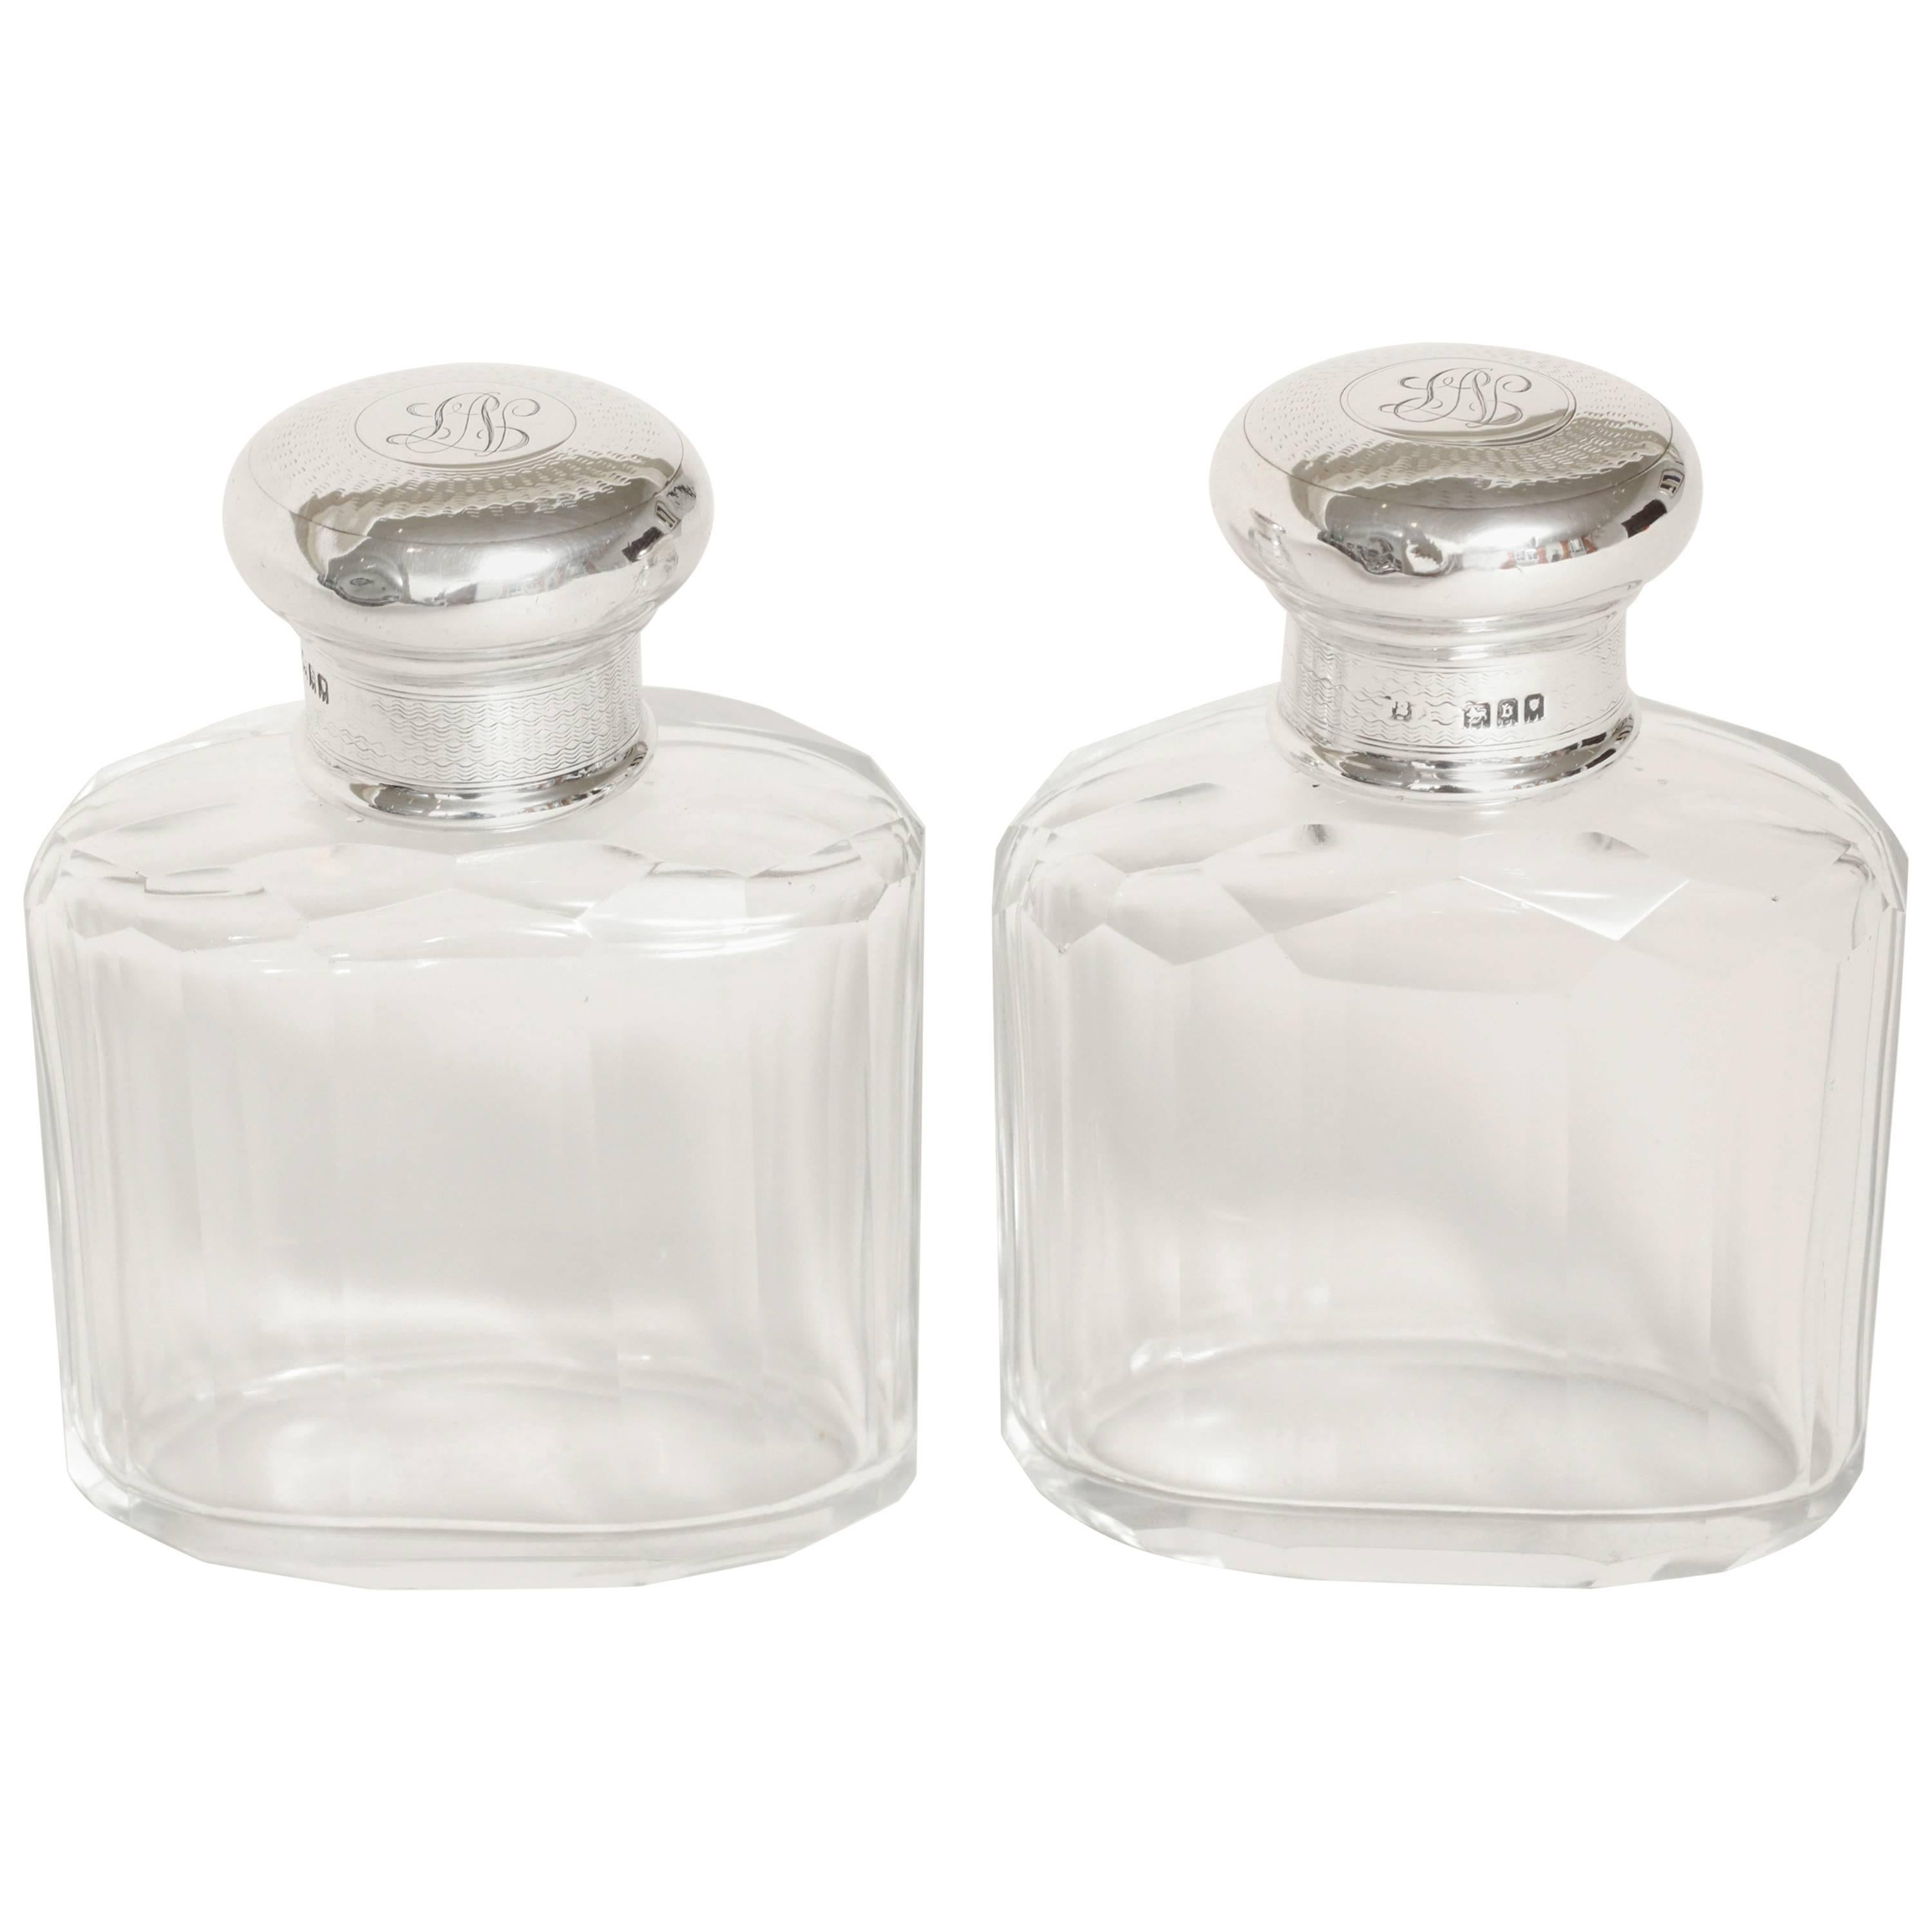 Sybil Dunlop English Art Deco Pair of Crystal & Sterling Silver Scent Bottles For Sale